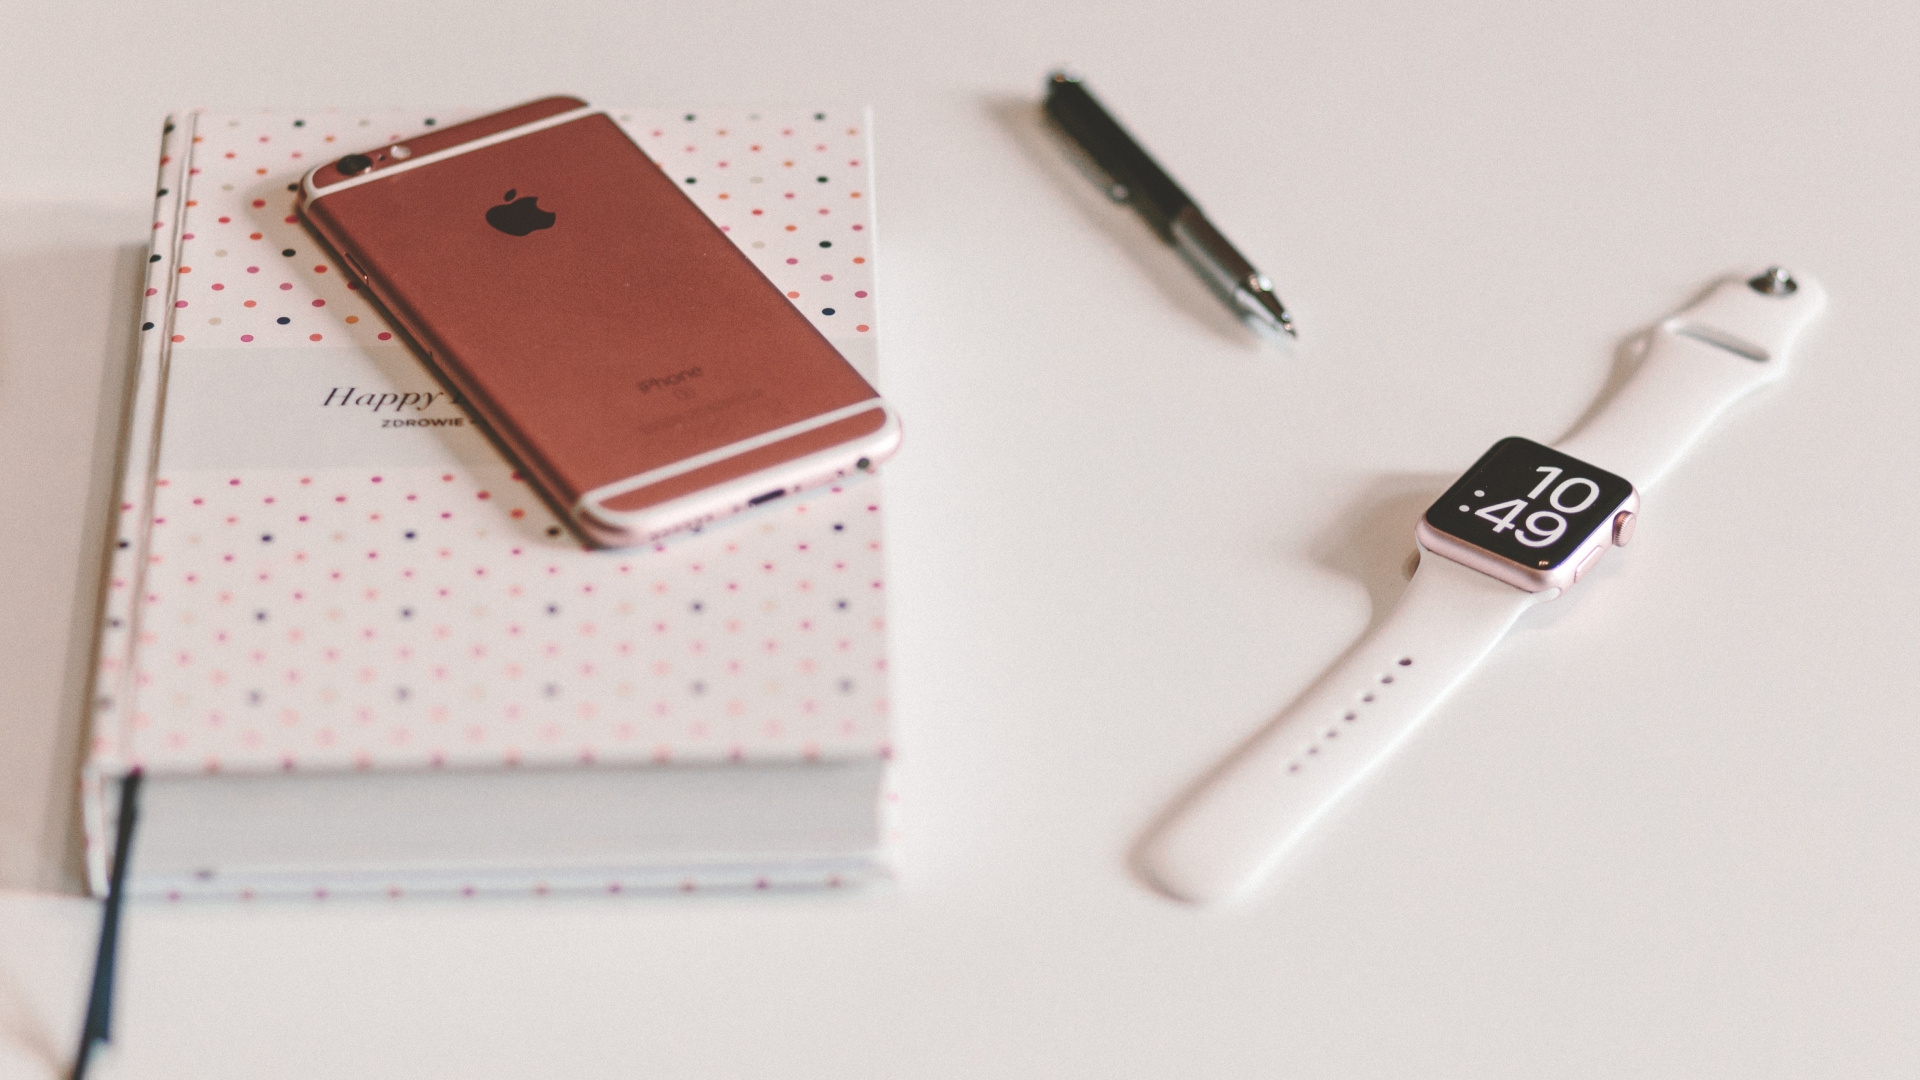 Silver Apple Watch With White Sport Band Beside Black Click Pen. Wallpaper in 1920x1080 Resolution